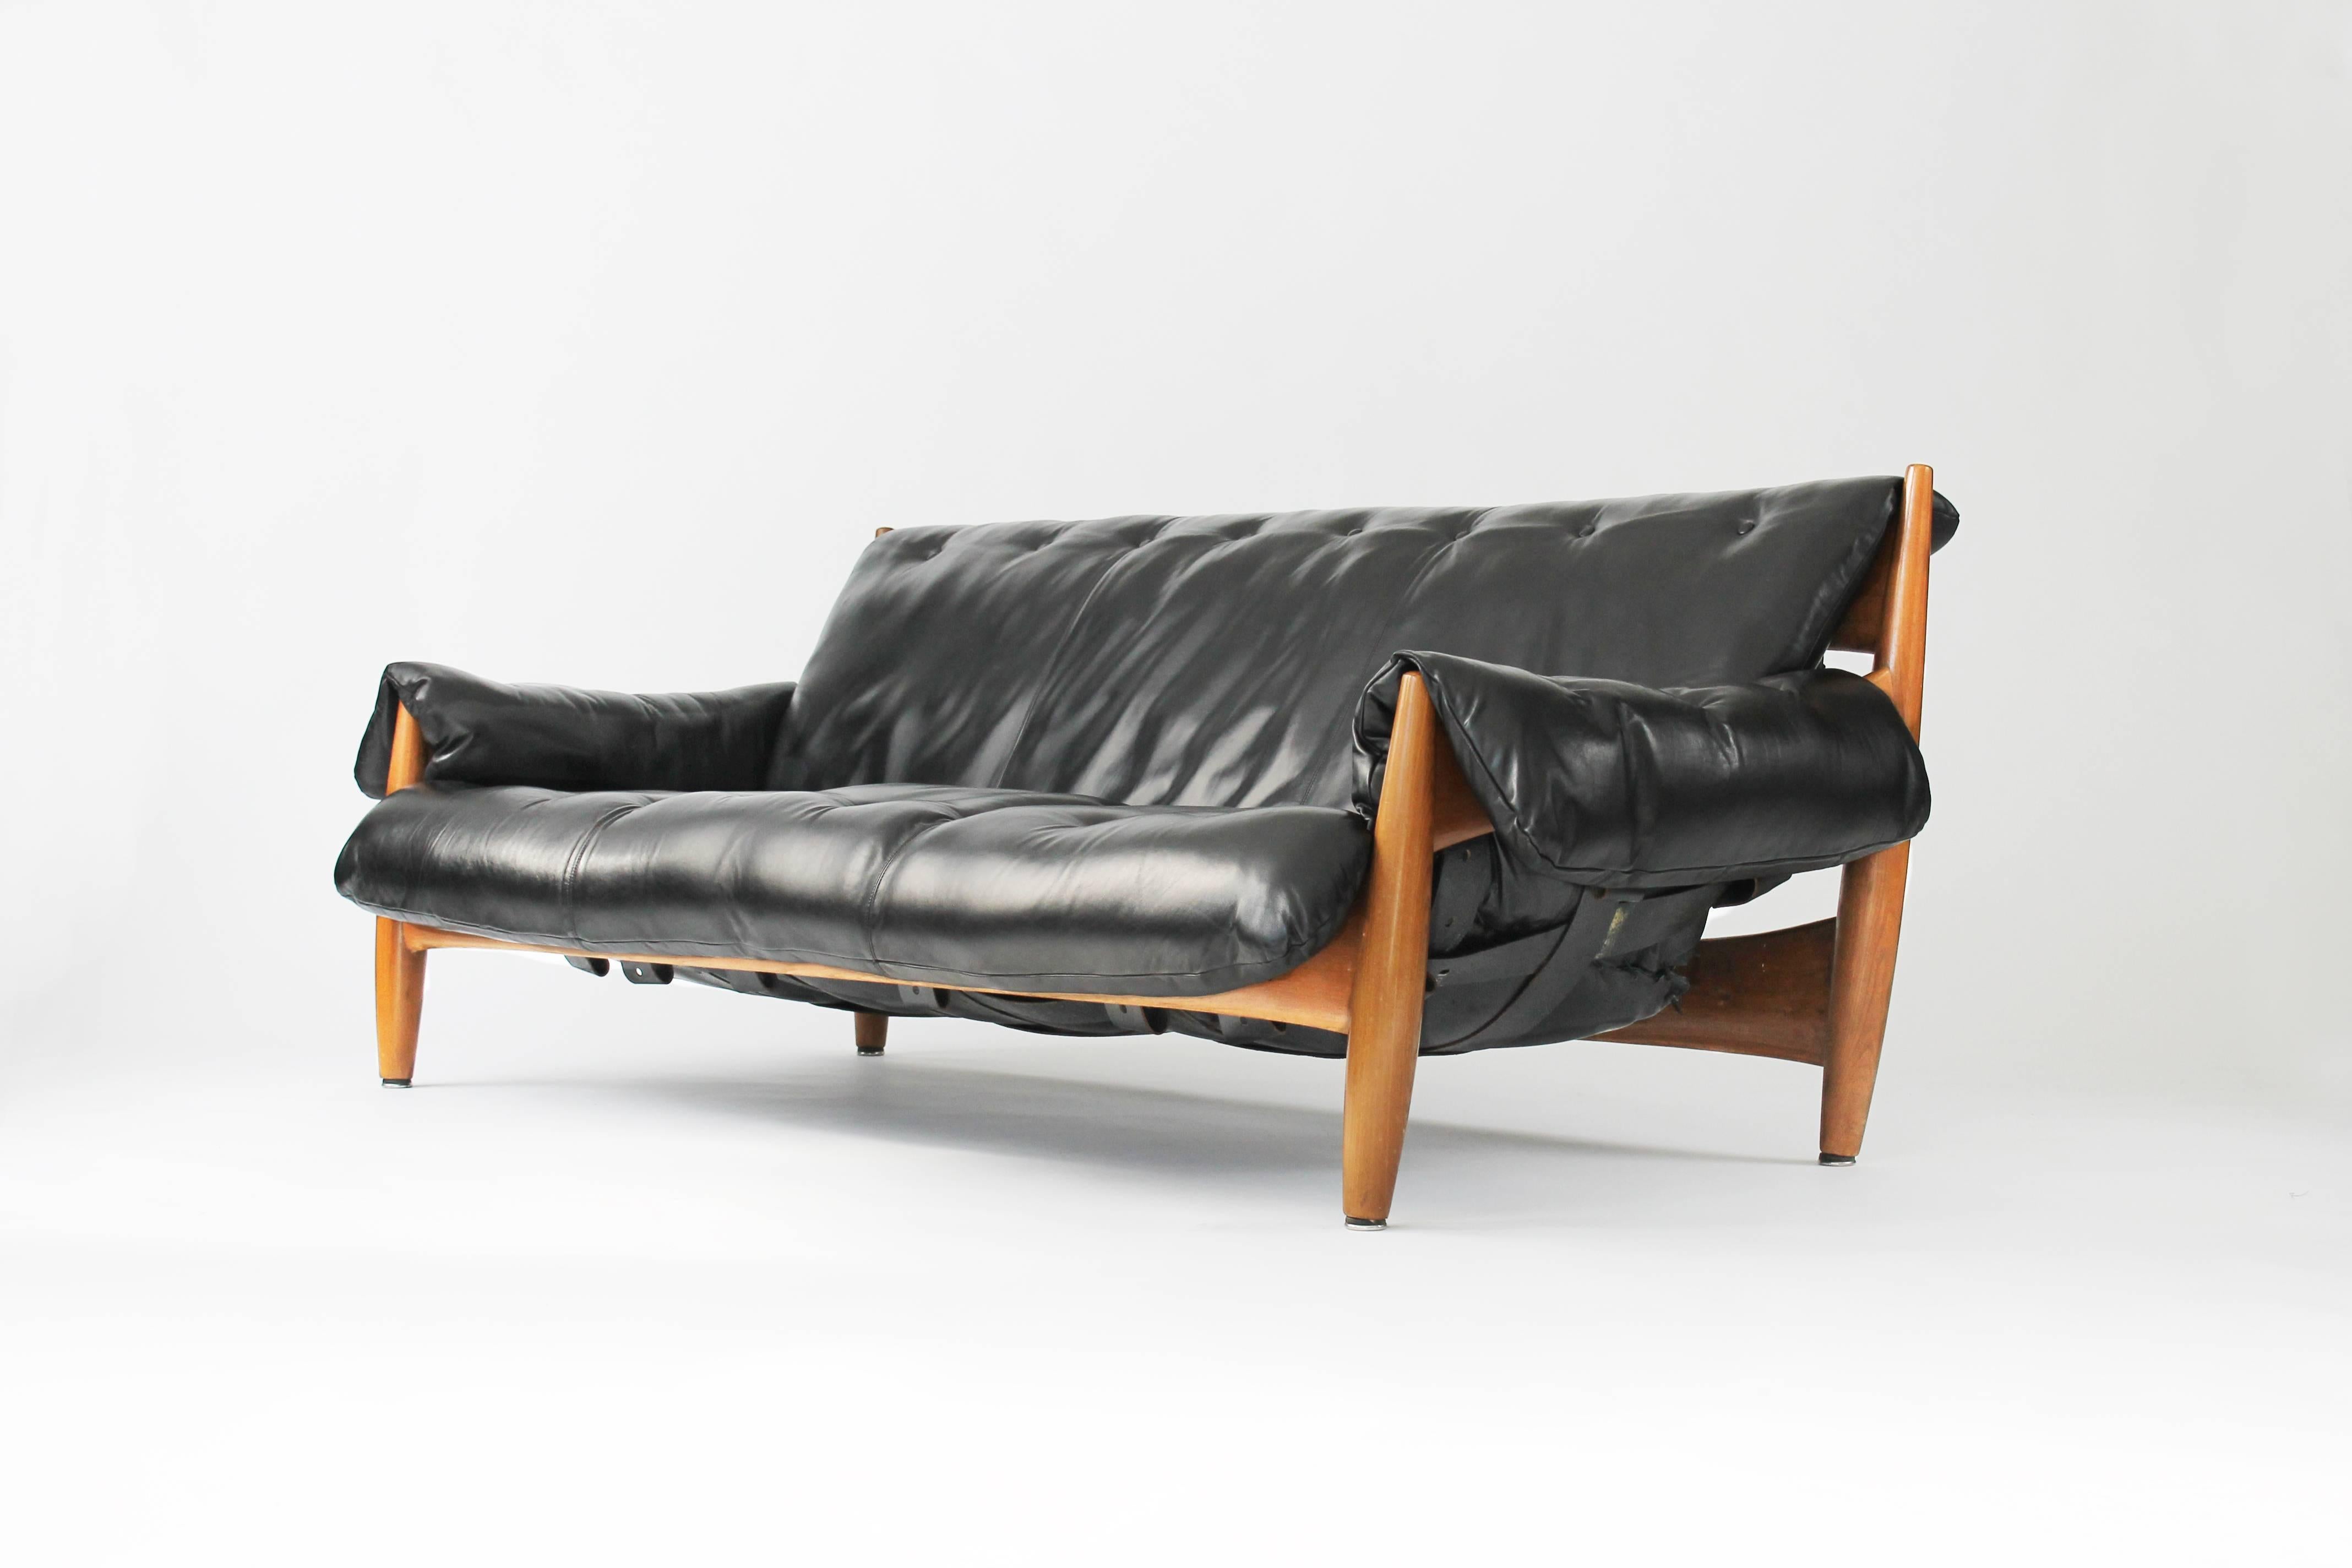 Sheriff sofa designed by Sergio Rodrigues and produced by ISA of Italy, circa 1960. Jacaranda and leather.